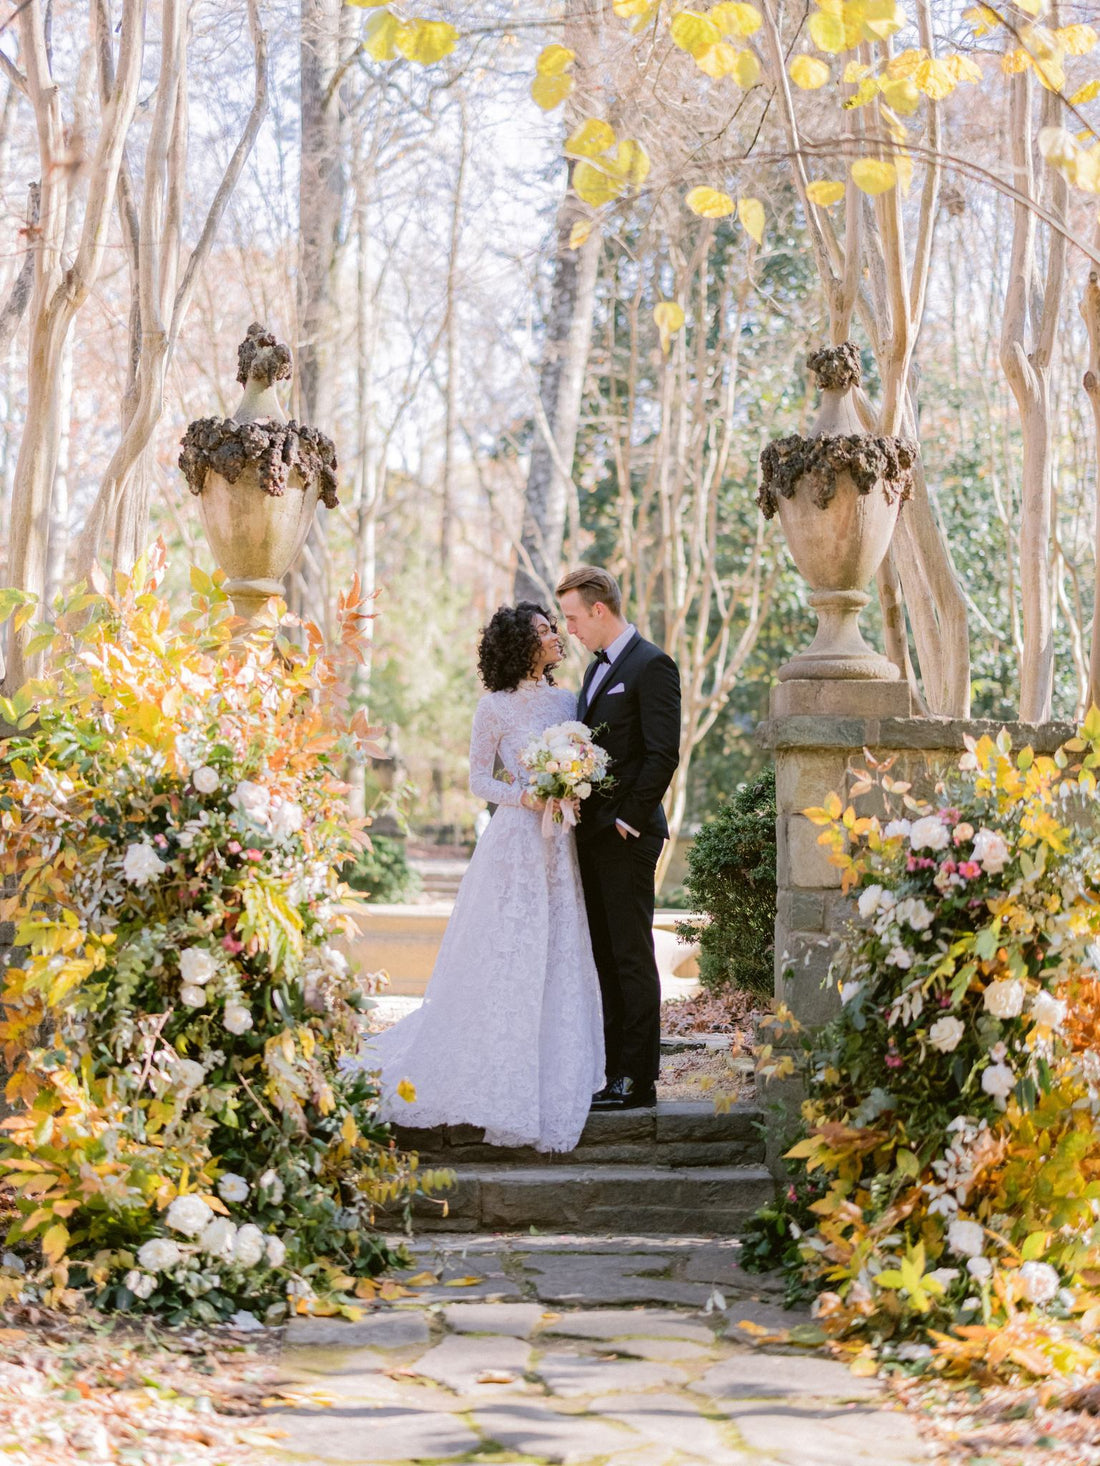 A Fantastical Floral Open Arch Is Just The Start Of This Fairytale Day at this Historical Venue in Atlanta, Georgia